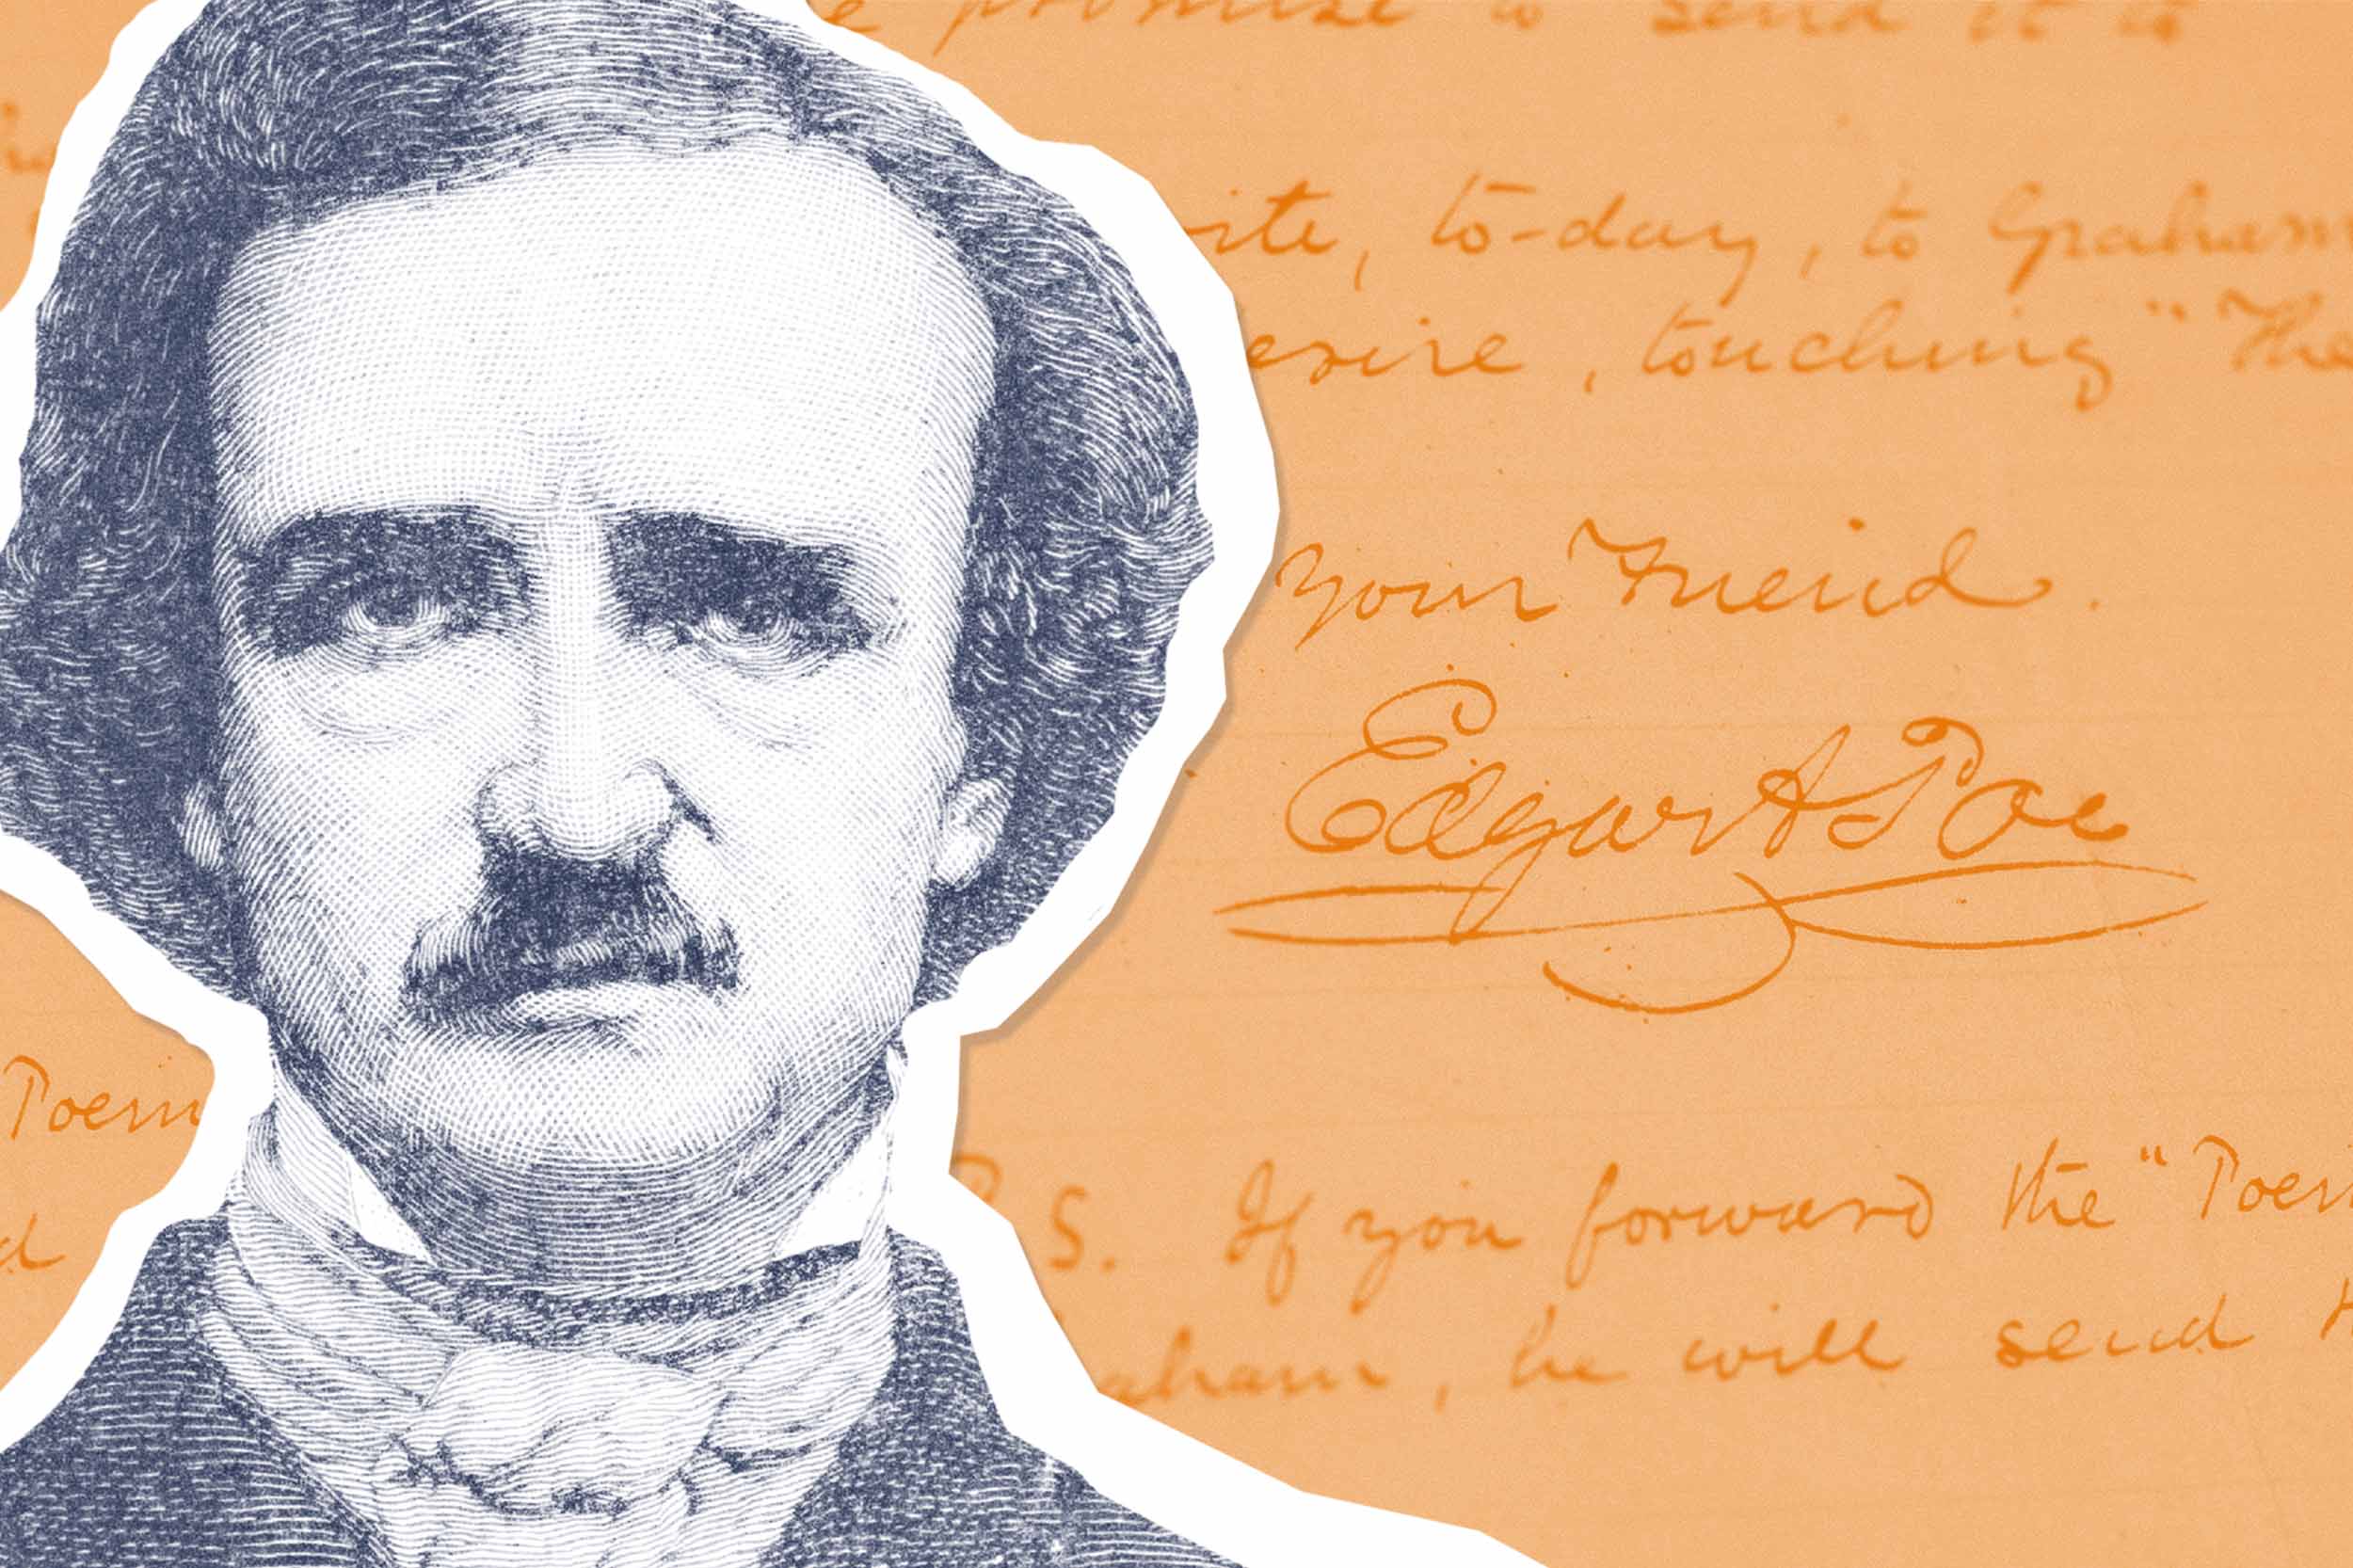 An illustration of Edgar Allan Poe over a orange background that includes the writer's handwriting and signature.